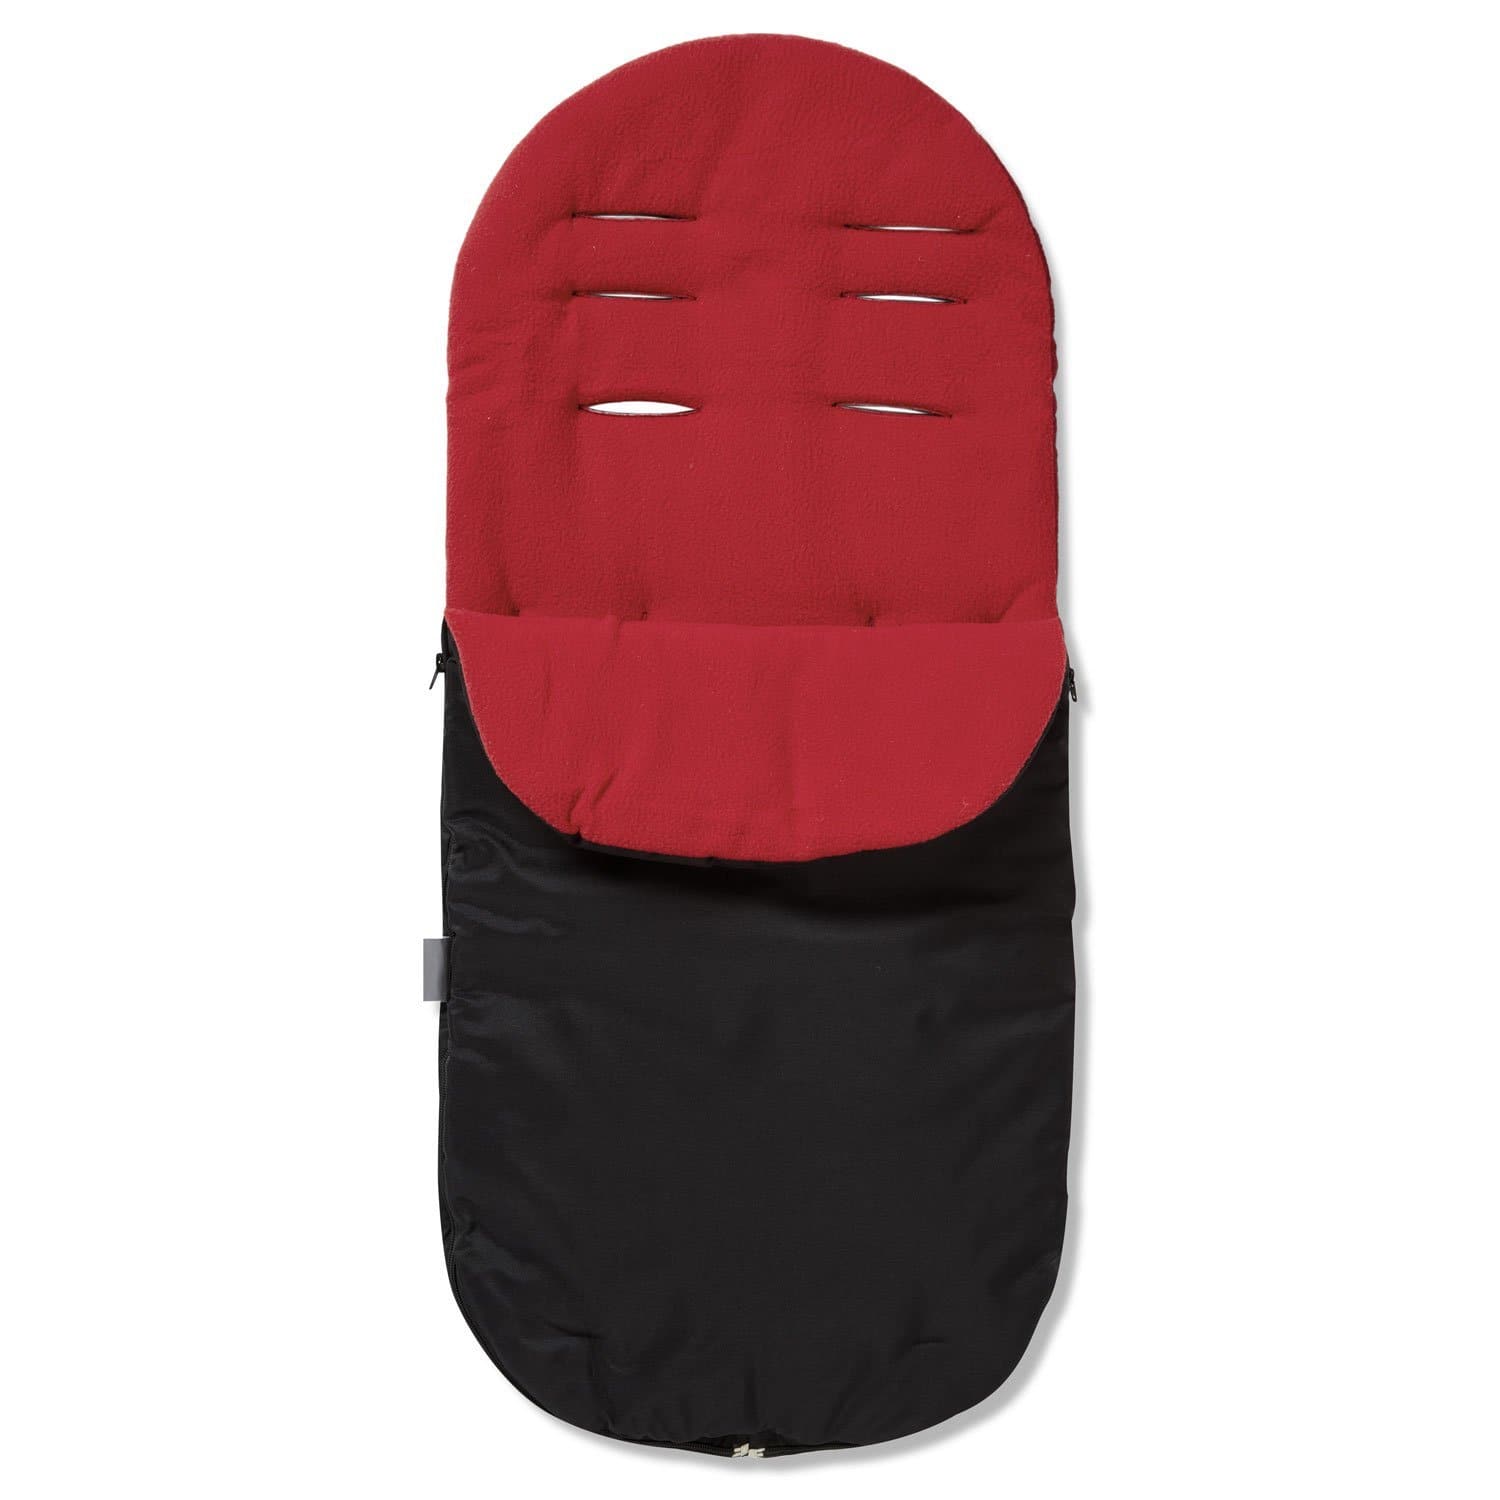 Footmuff / Cosy Toes Compatible with BabyCare - Red / Fits All Models | For Your Little One